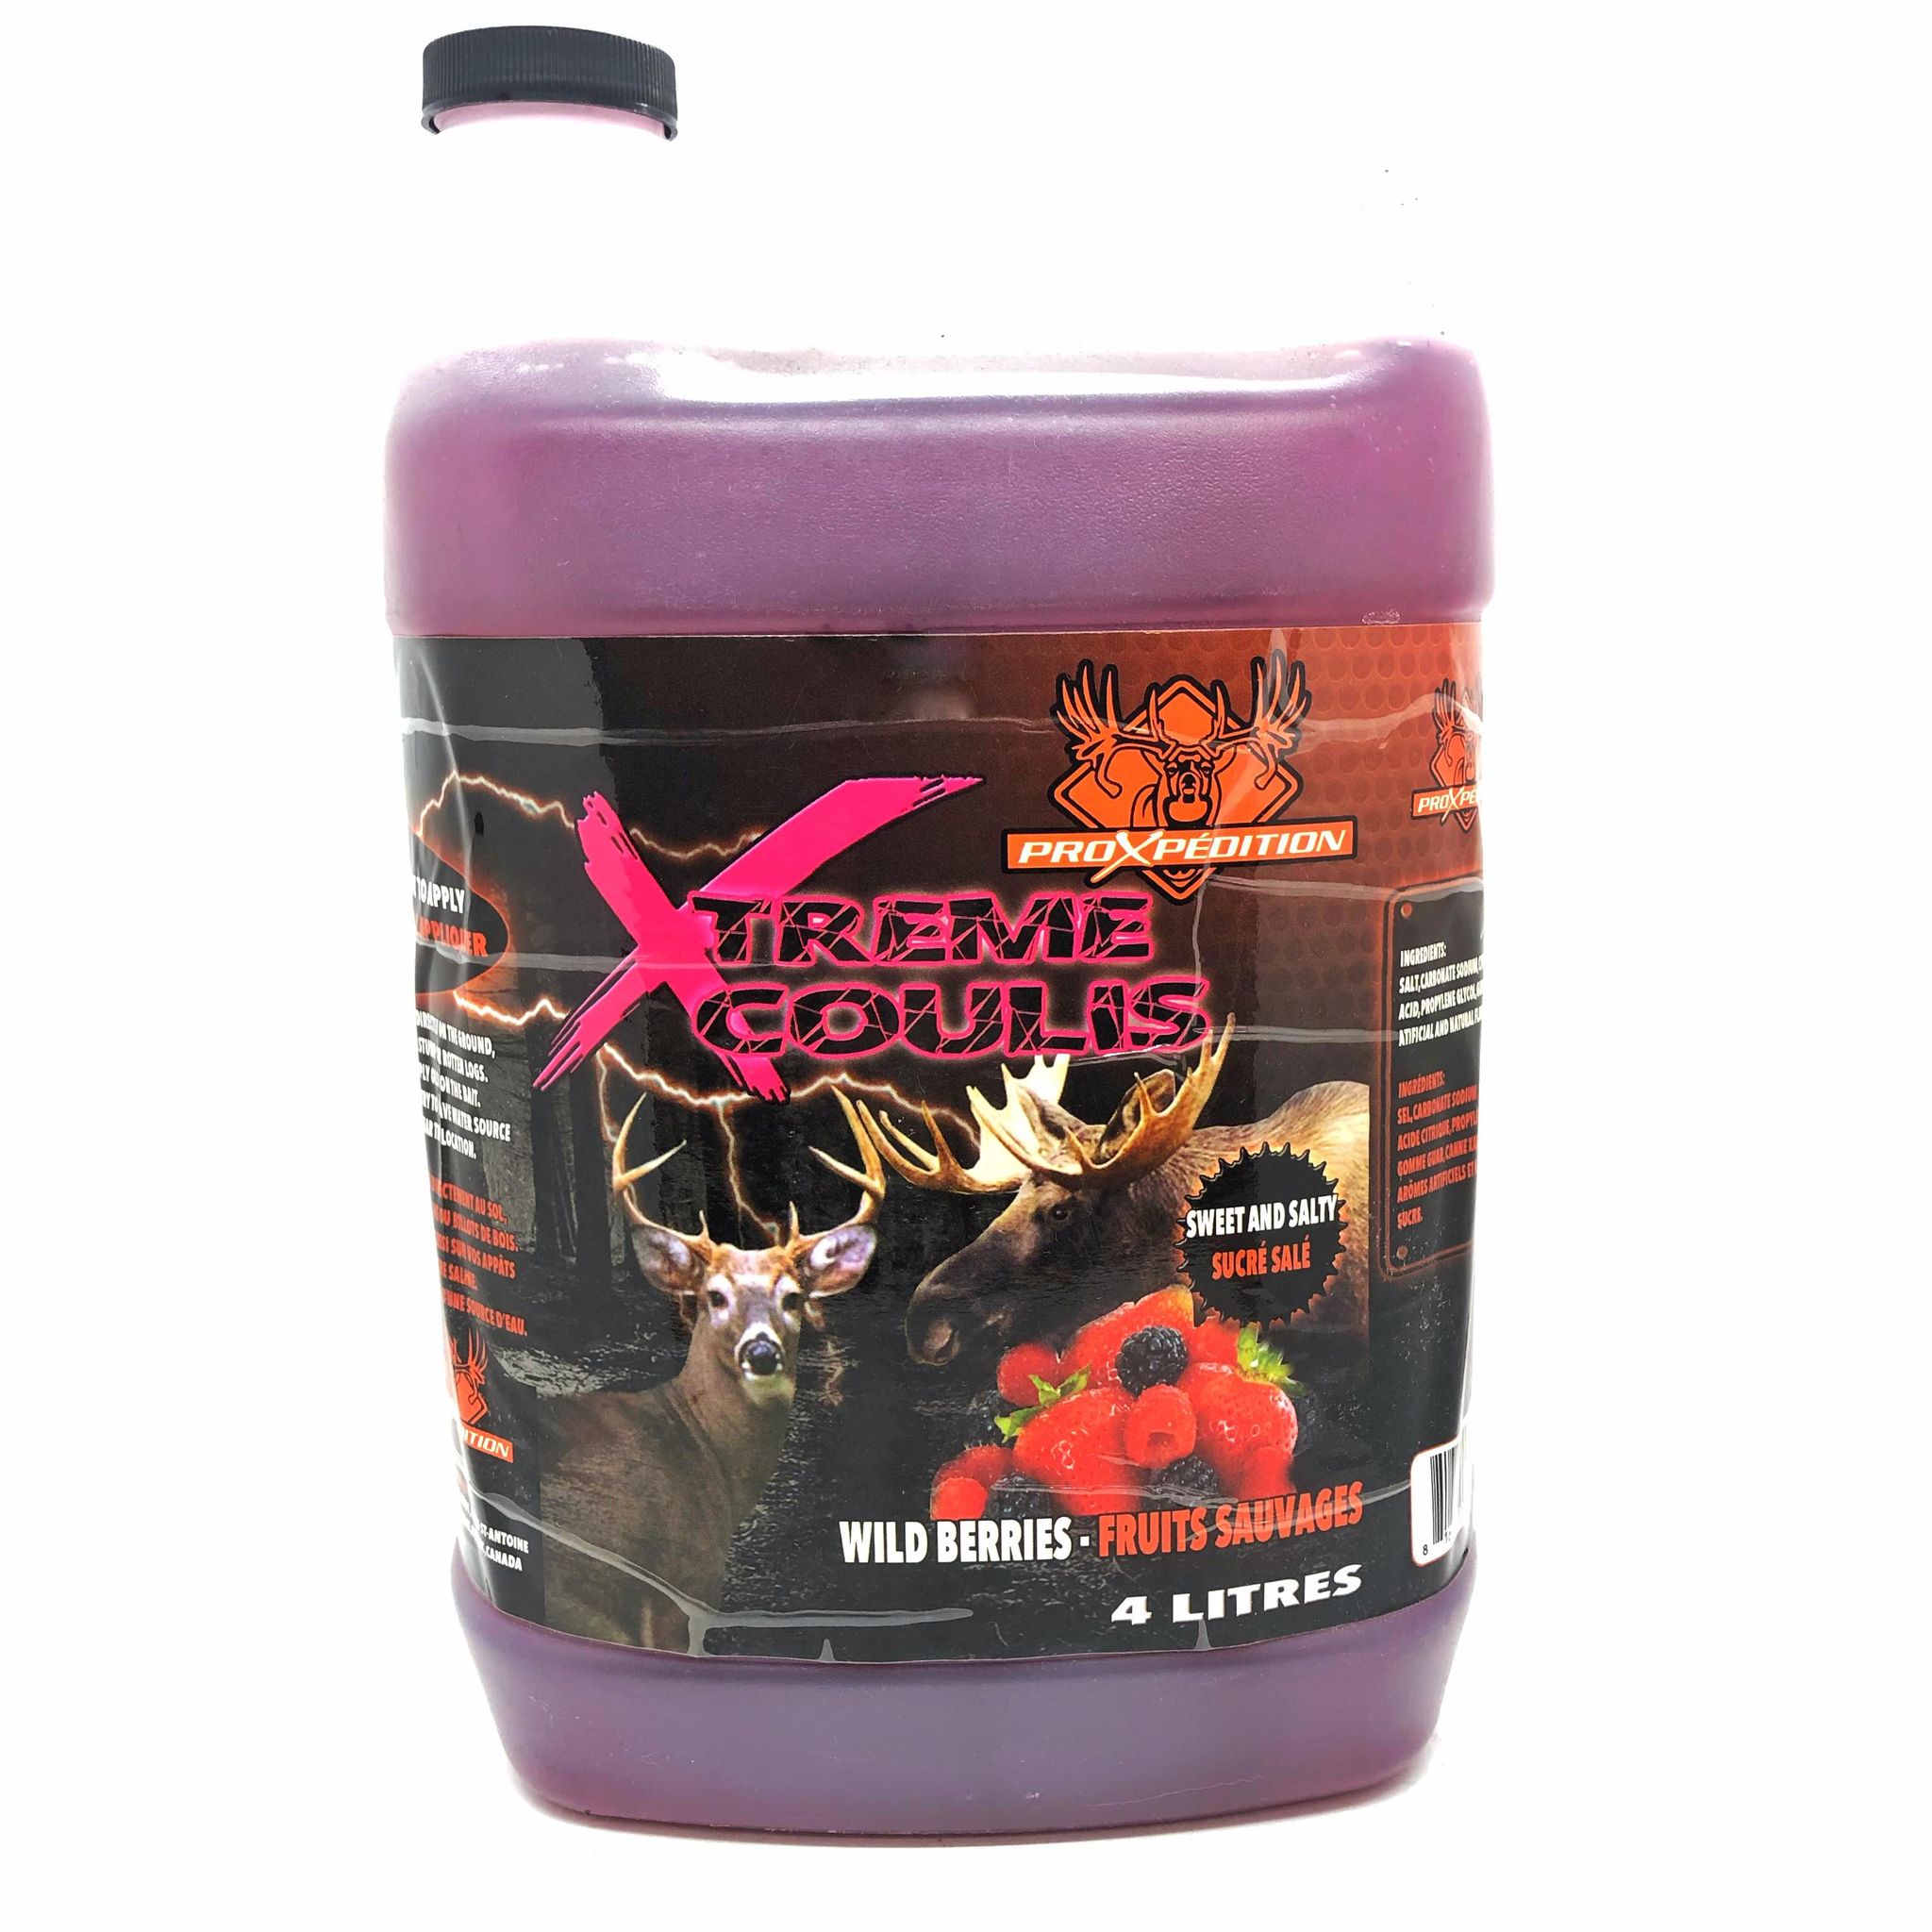 Xtreme-coulis fruits sauvages proXpedition